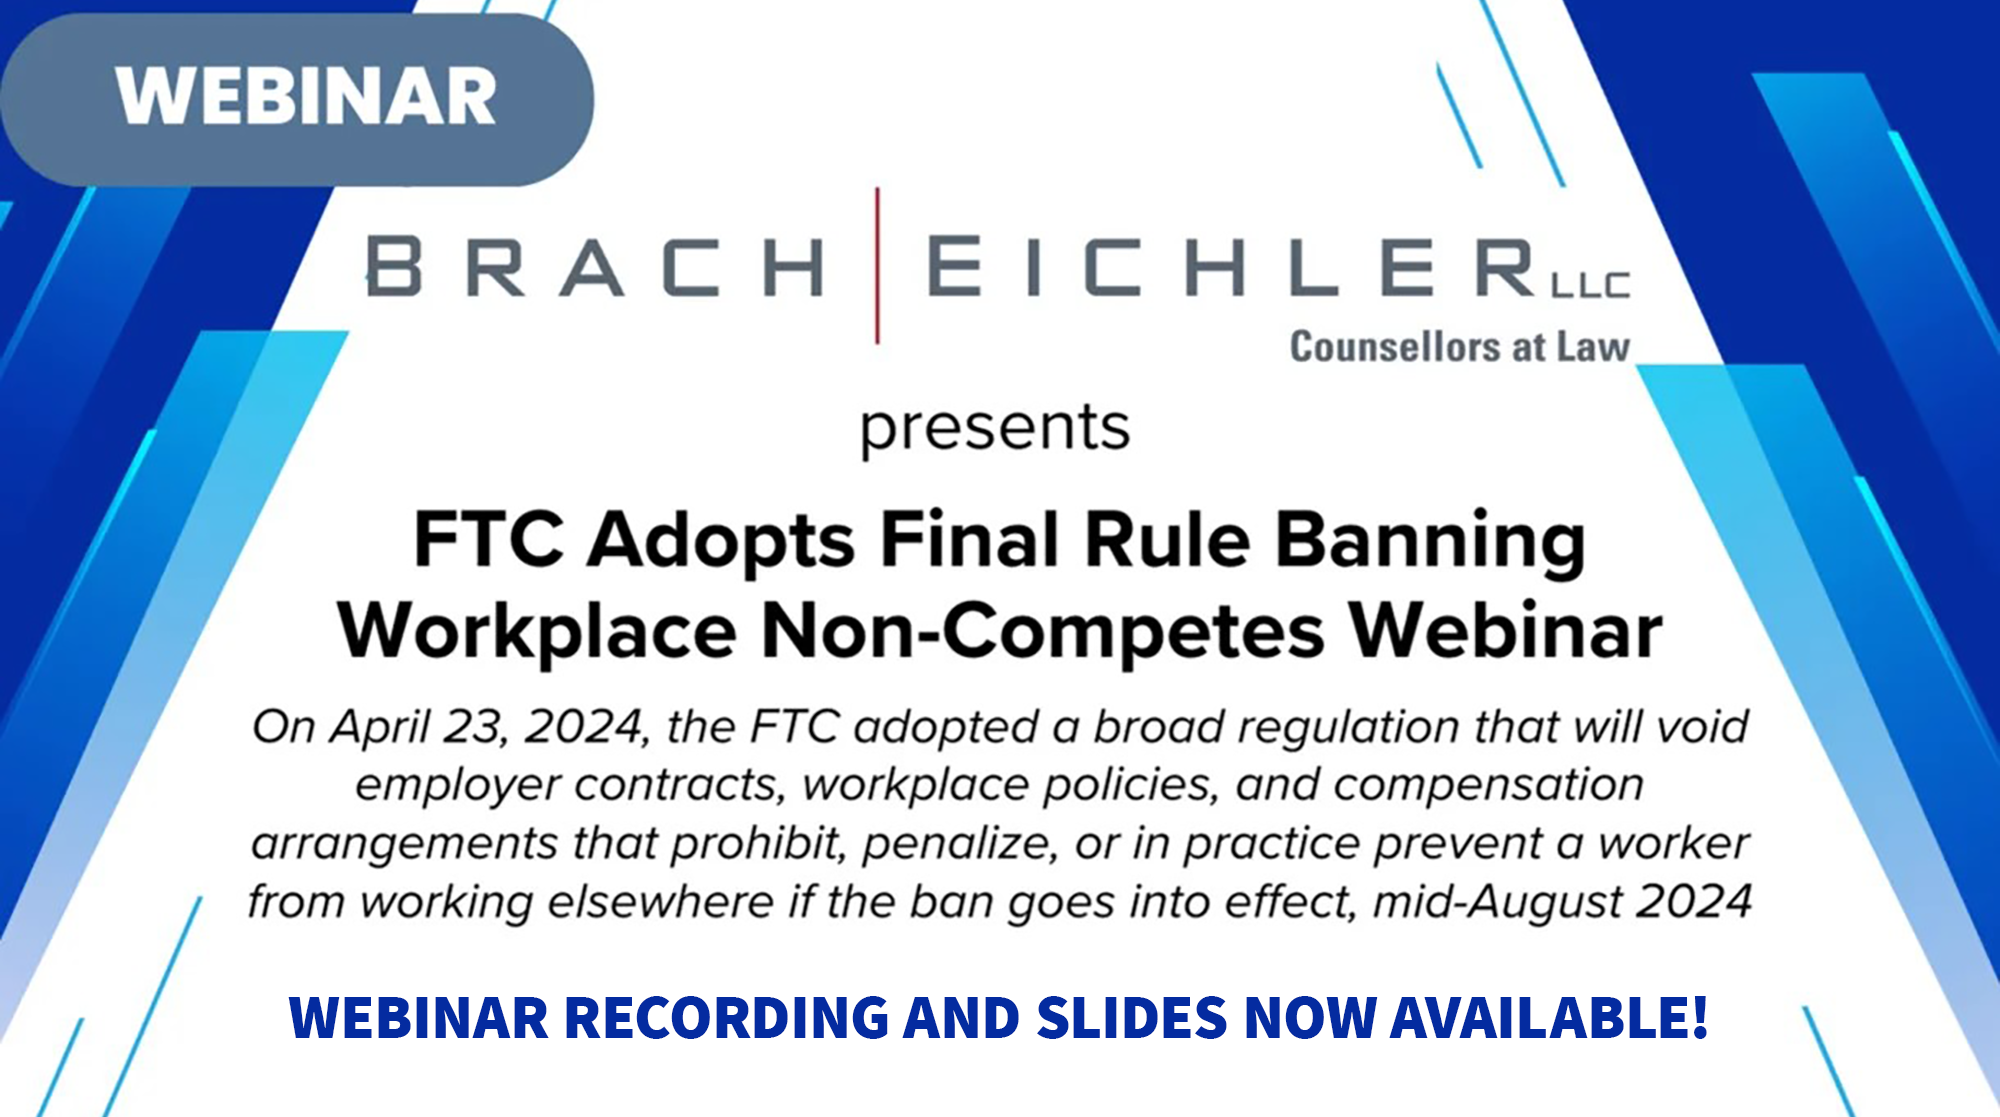 FTC Adopts Final Rule Banning Workplace Non-Competes Webinar - 5-9-2024 - Brach Eichler